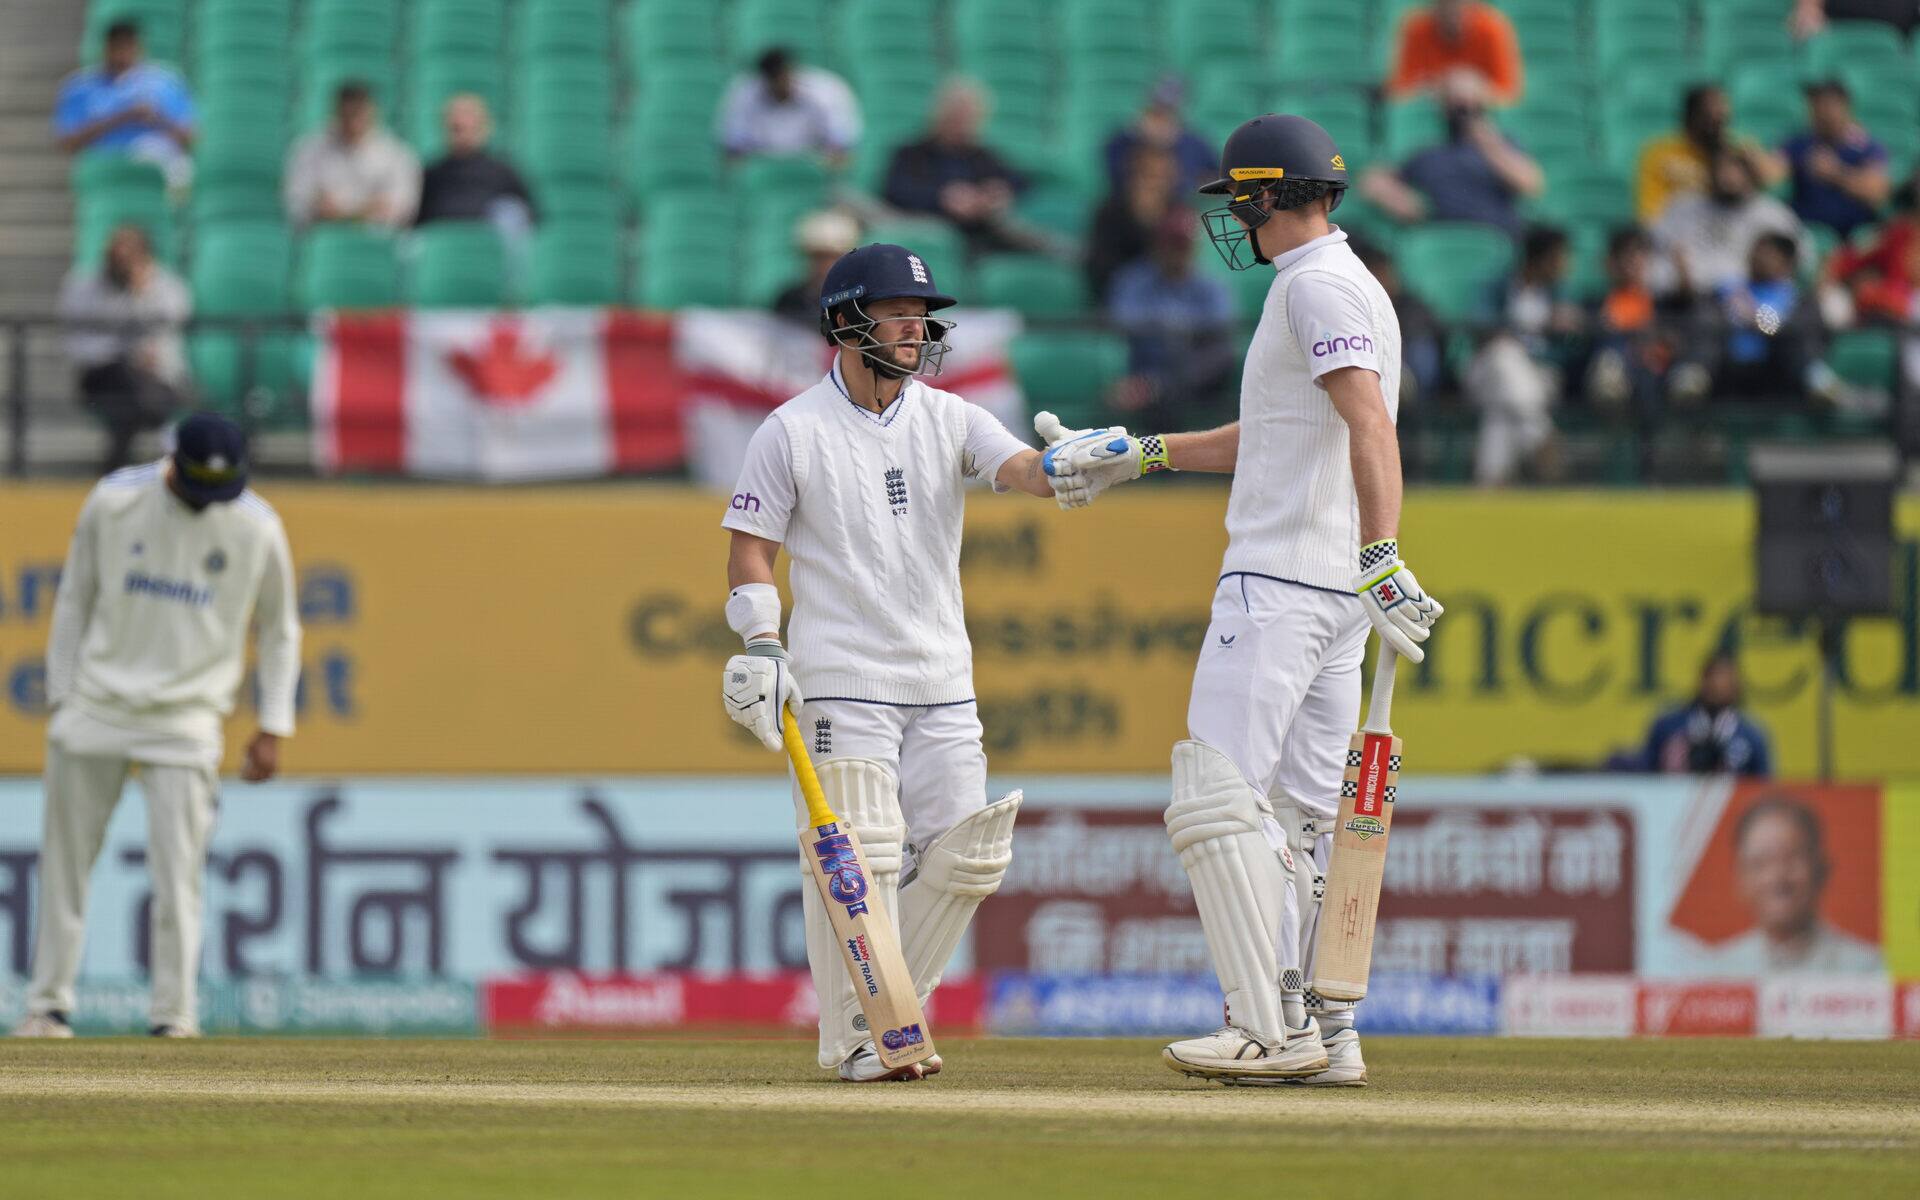 Duckett-Crawley have been in fine form for England (Source: AP Photo)